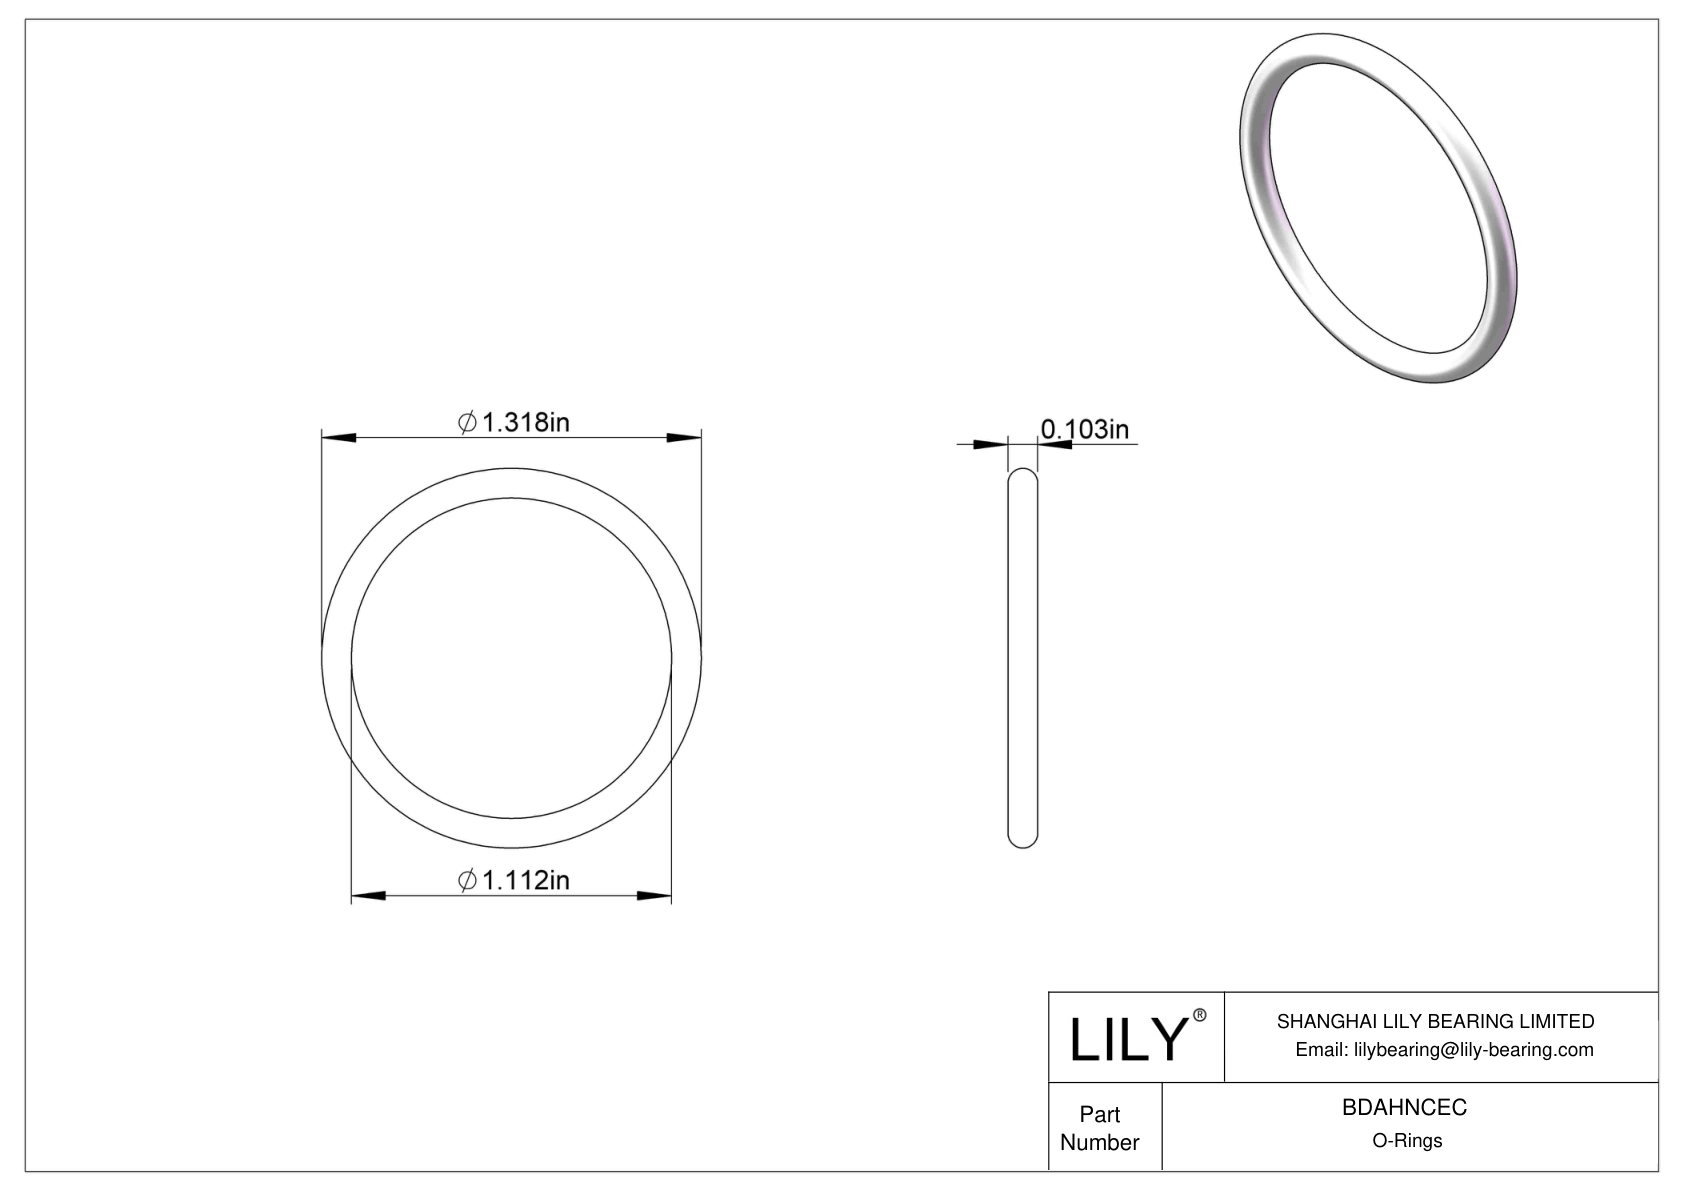 BDAHNCEC Oil Resistant O-Rings Round cad drawing